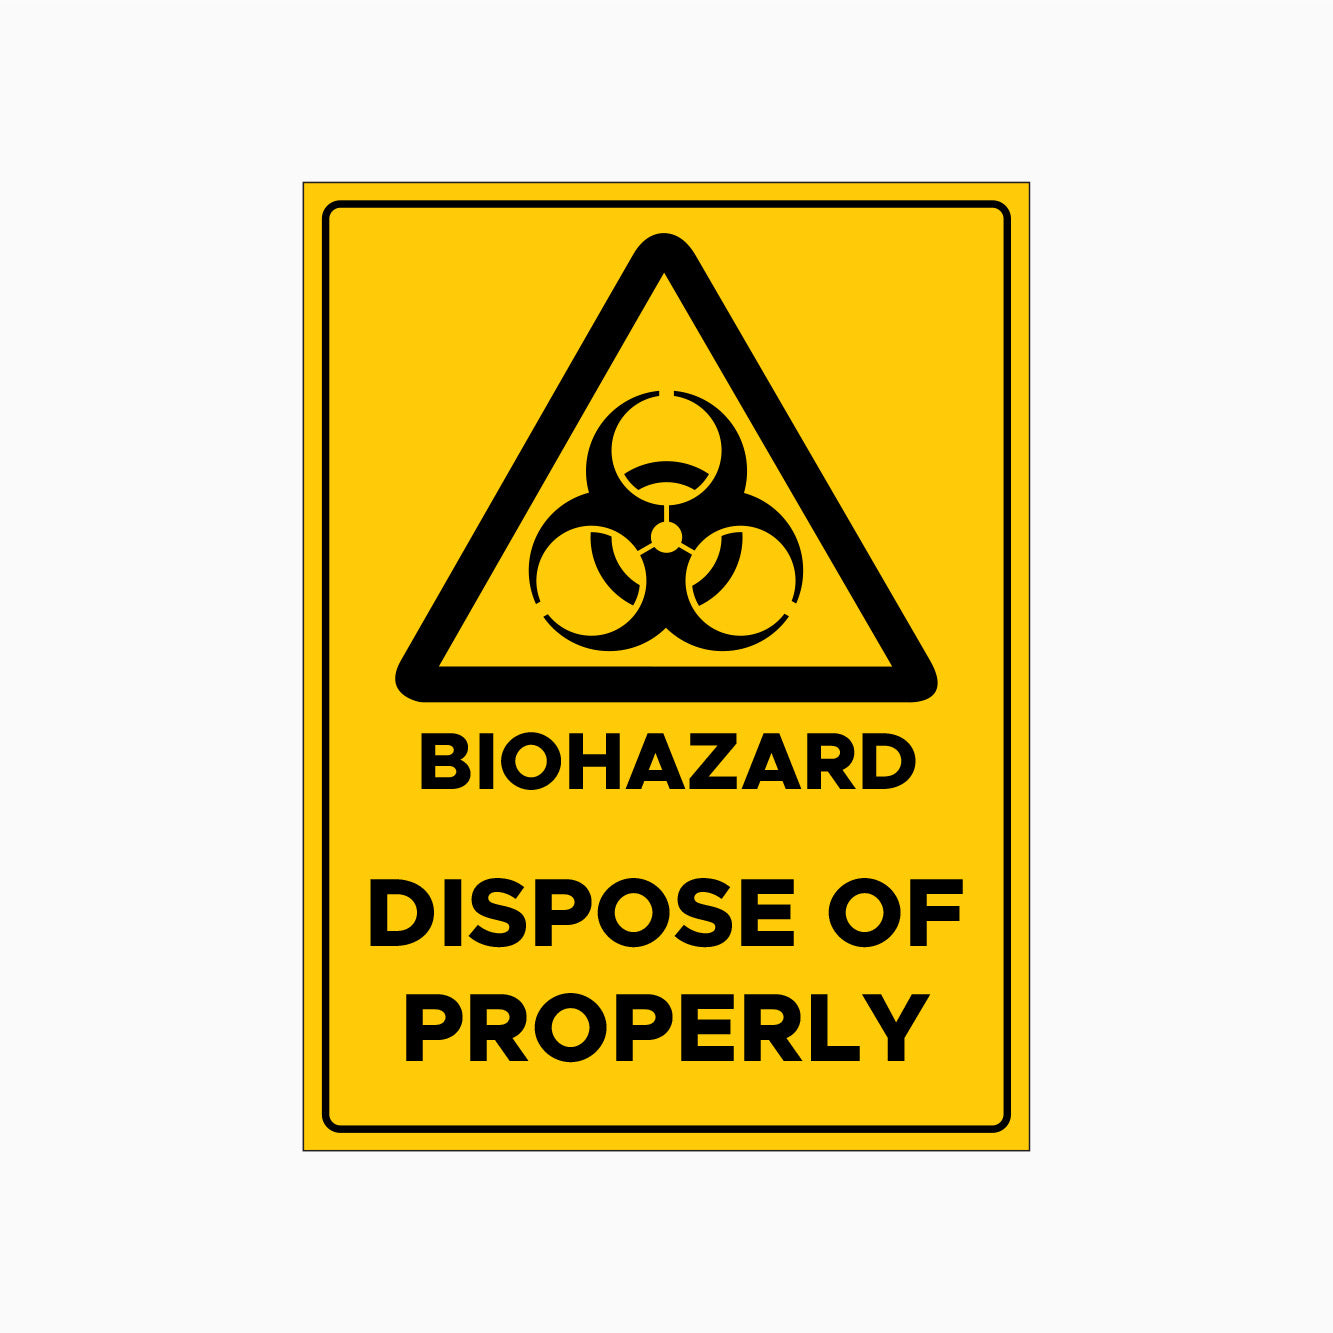 BIOHAZARD - DISPOSE OF PROPERLY SIGN